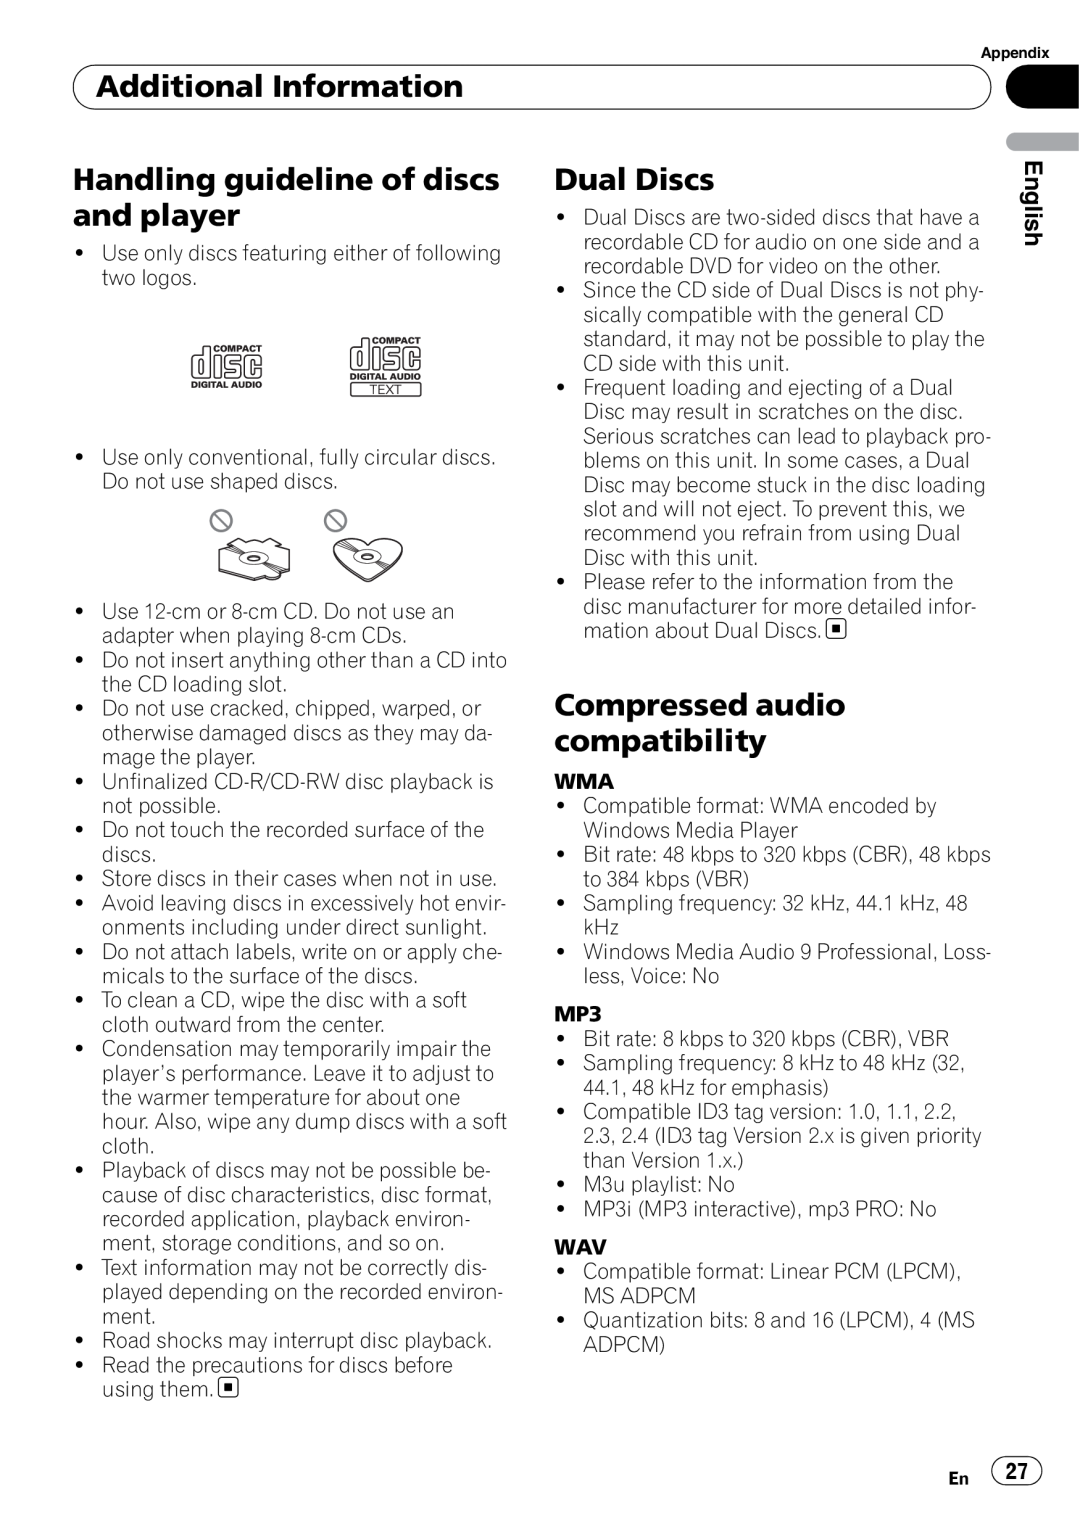 Pioneer DEH-3050UB Handling guideline of discs and player, Dual Discs, Compressed audio compatibility, English 